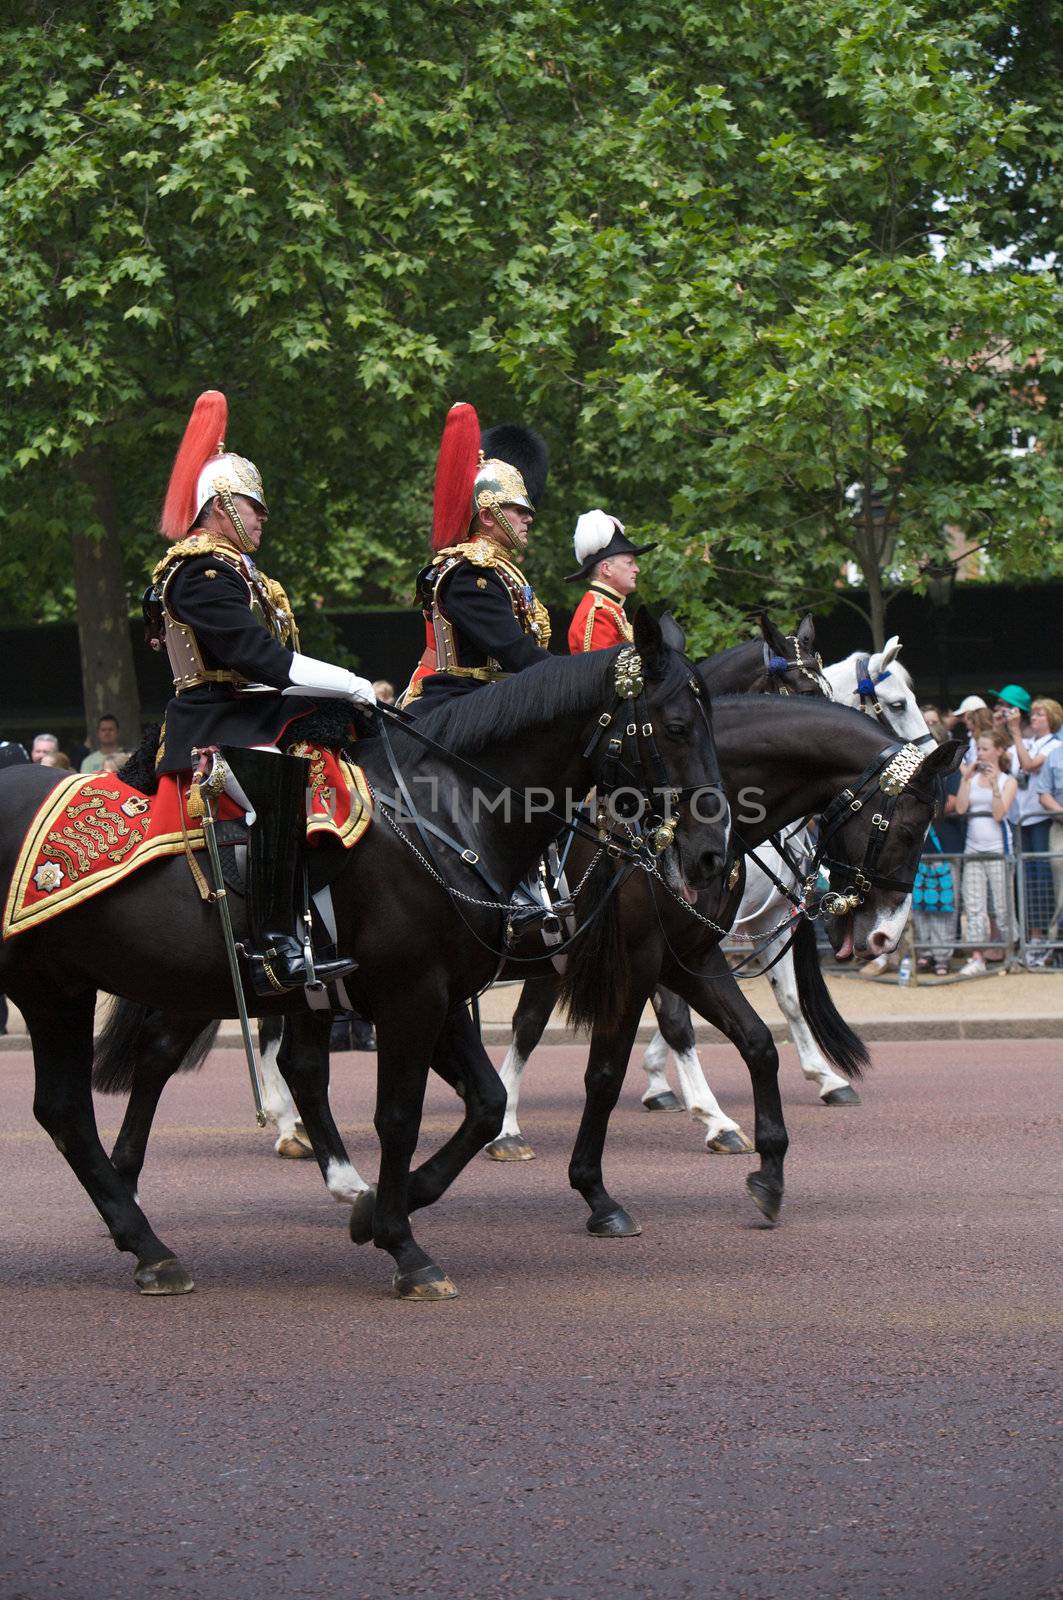 Trooping of the colors ion the Queen's birthday, one of London's most popular annual pageants.